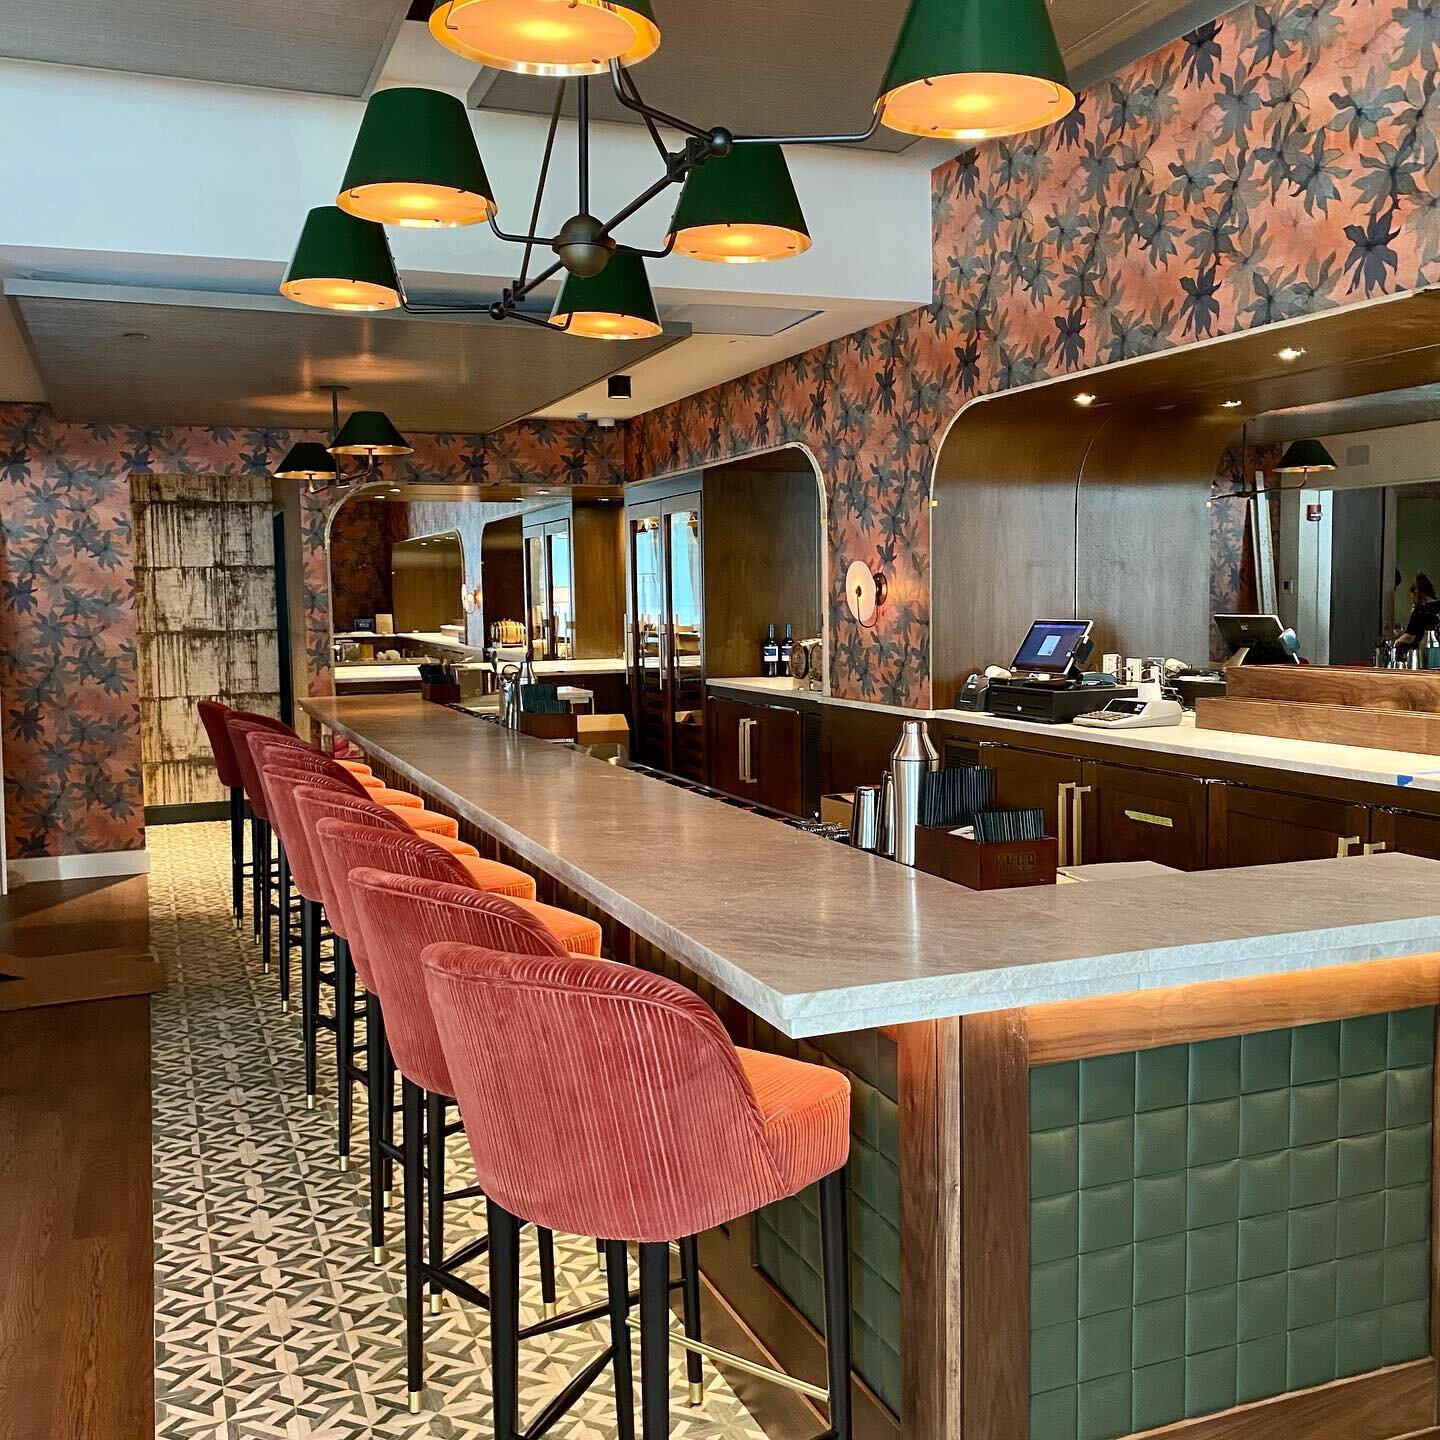 Tosca is Now open for dinner, Tuesday-Saturday. Stop in to have a drink at the beautiful new bar!